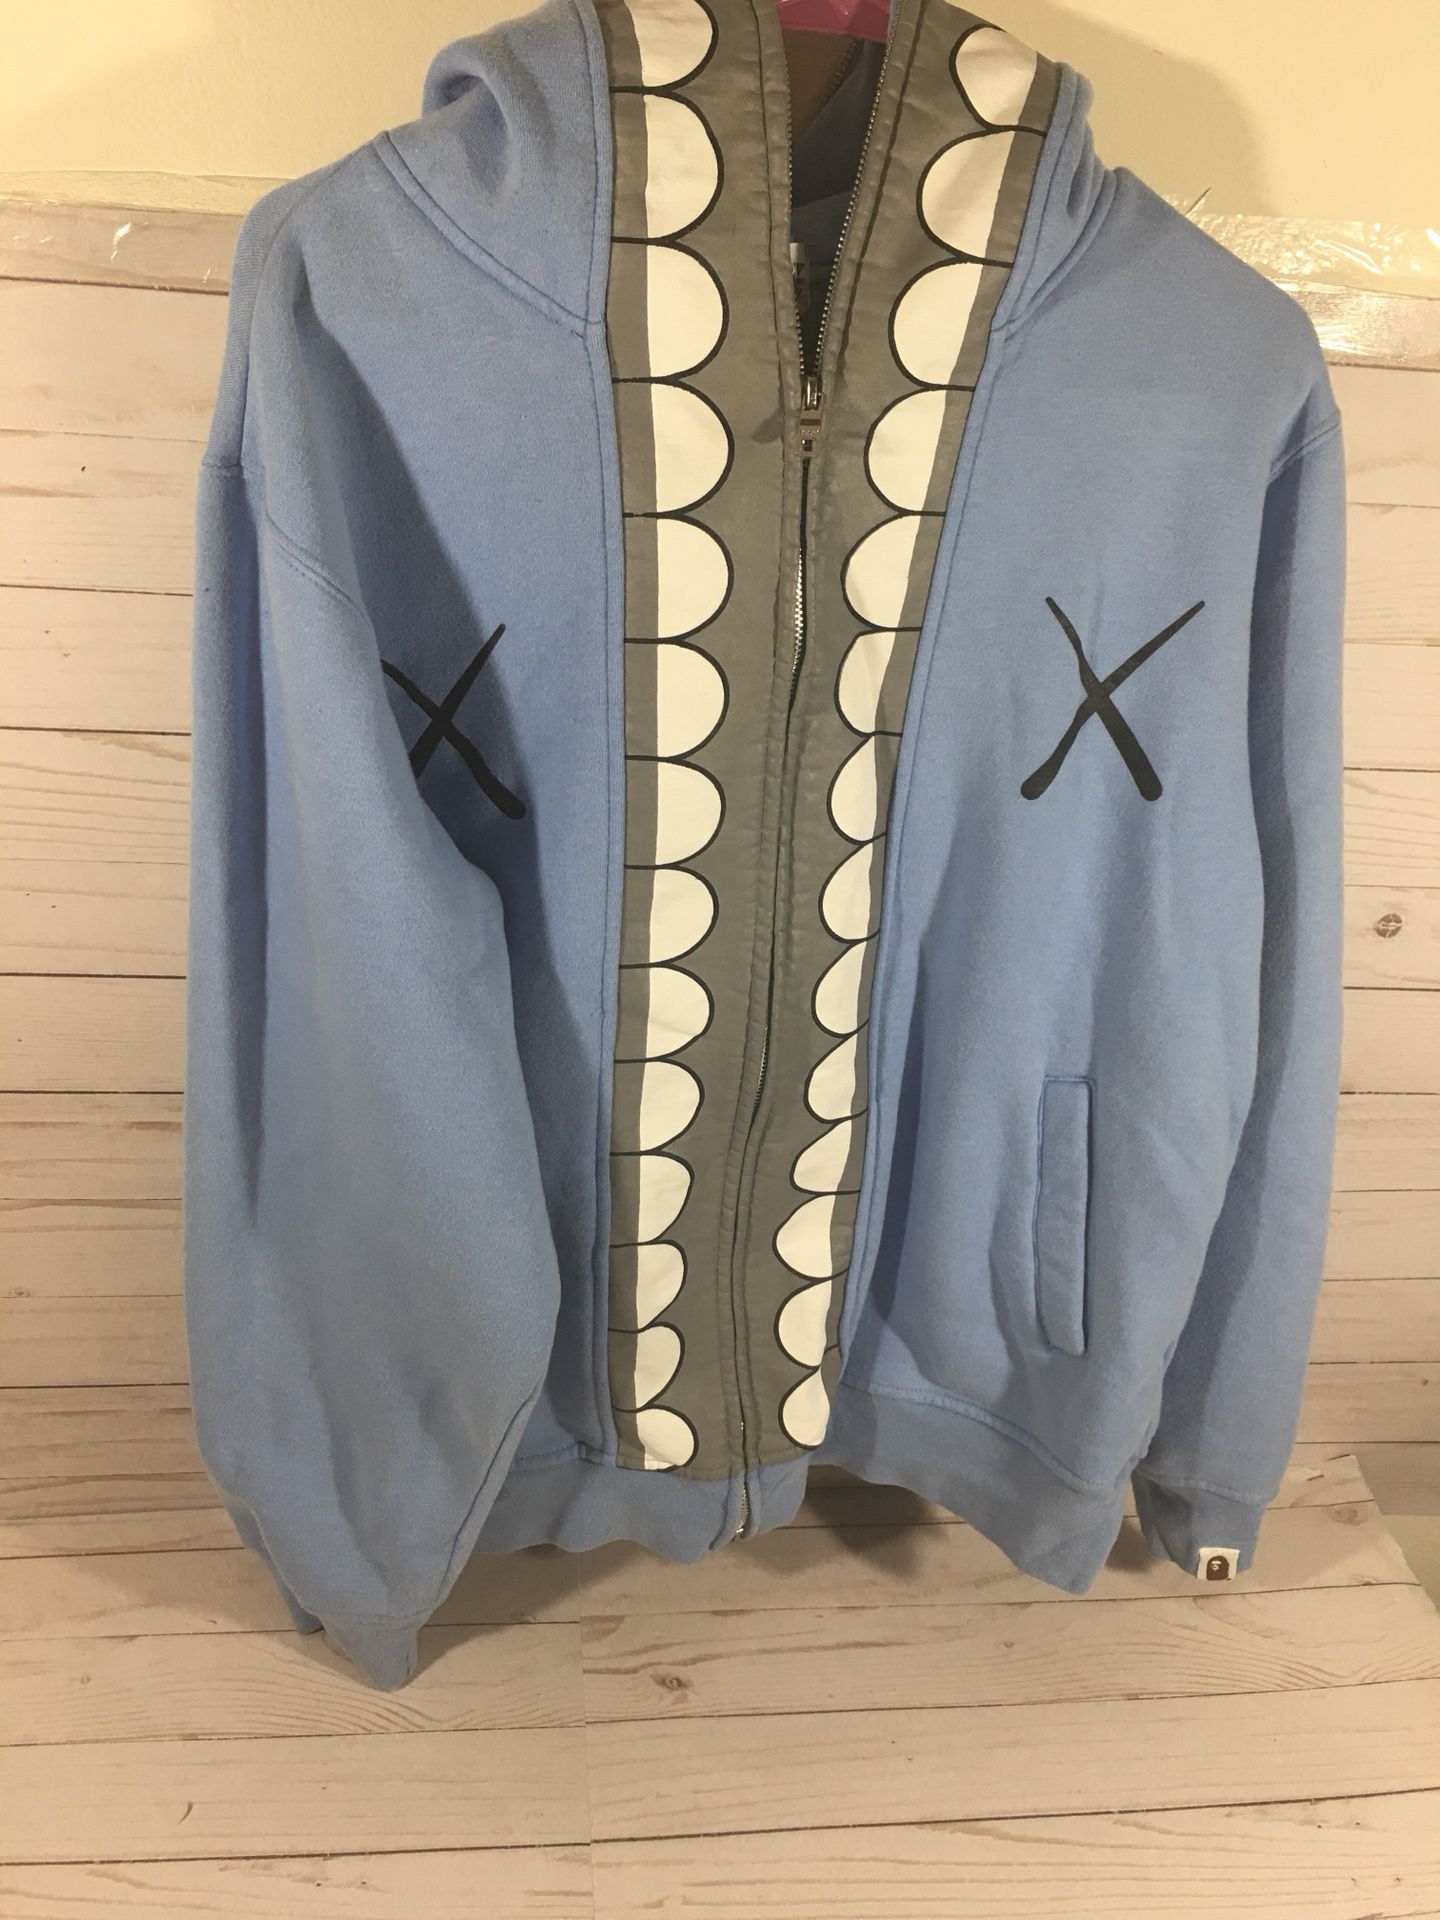 Hoodie for men’s size M